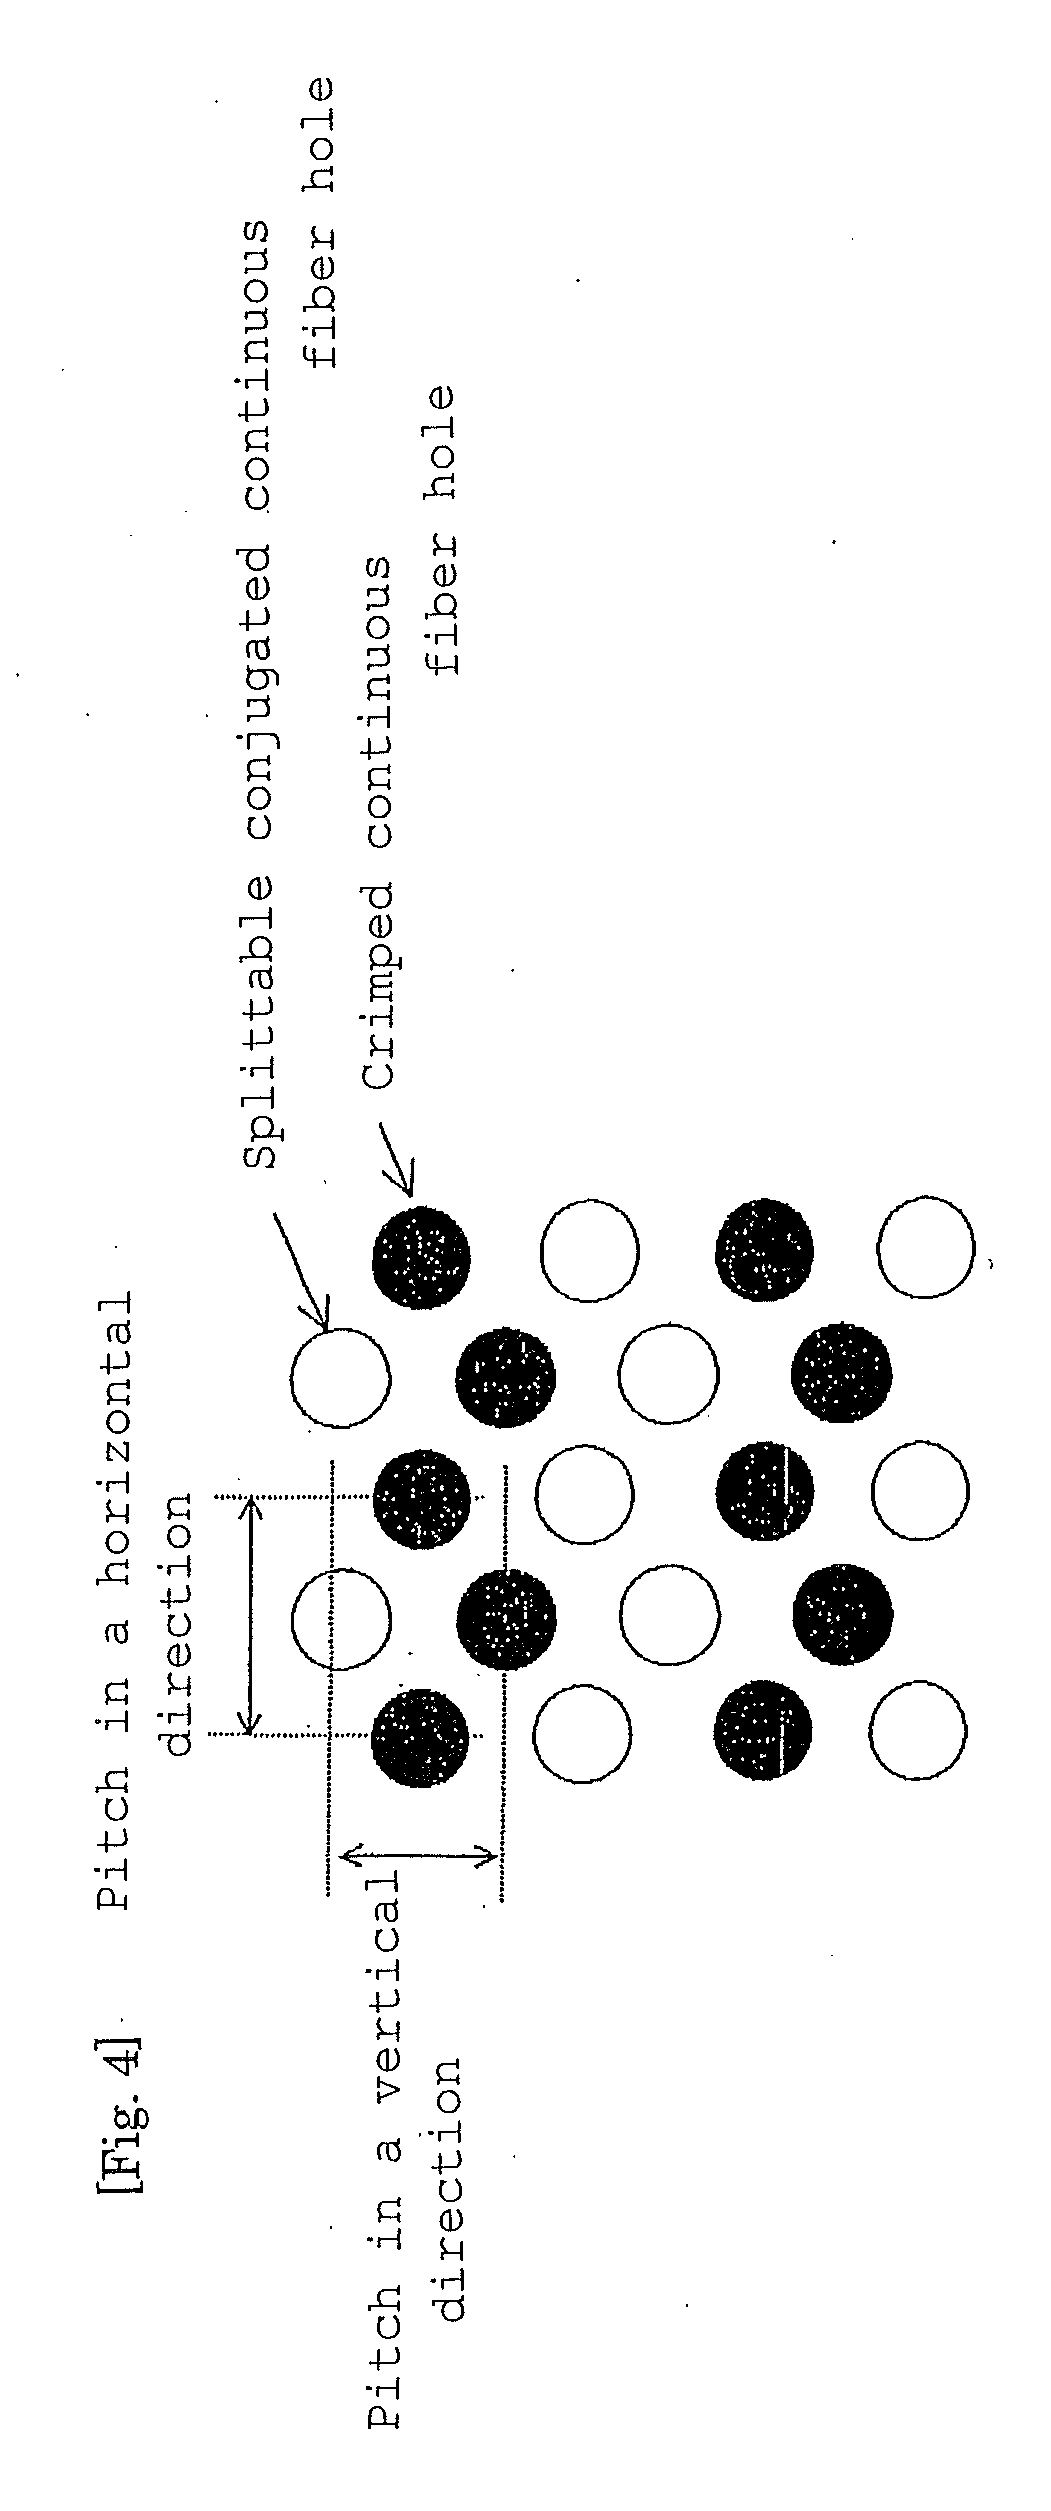 Mixed continuous fiber non-woven fabric and method for producing the same